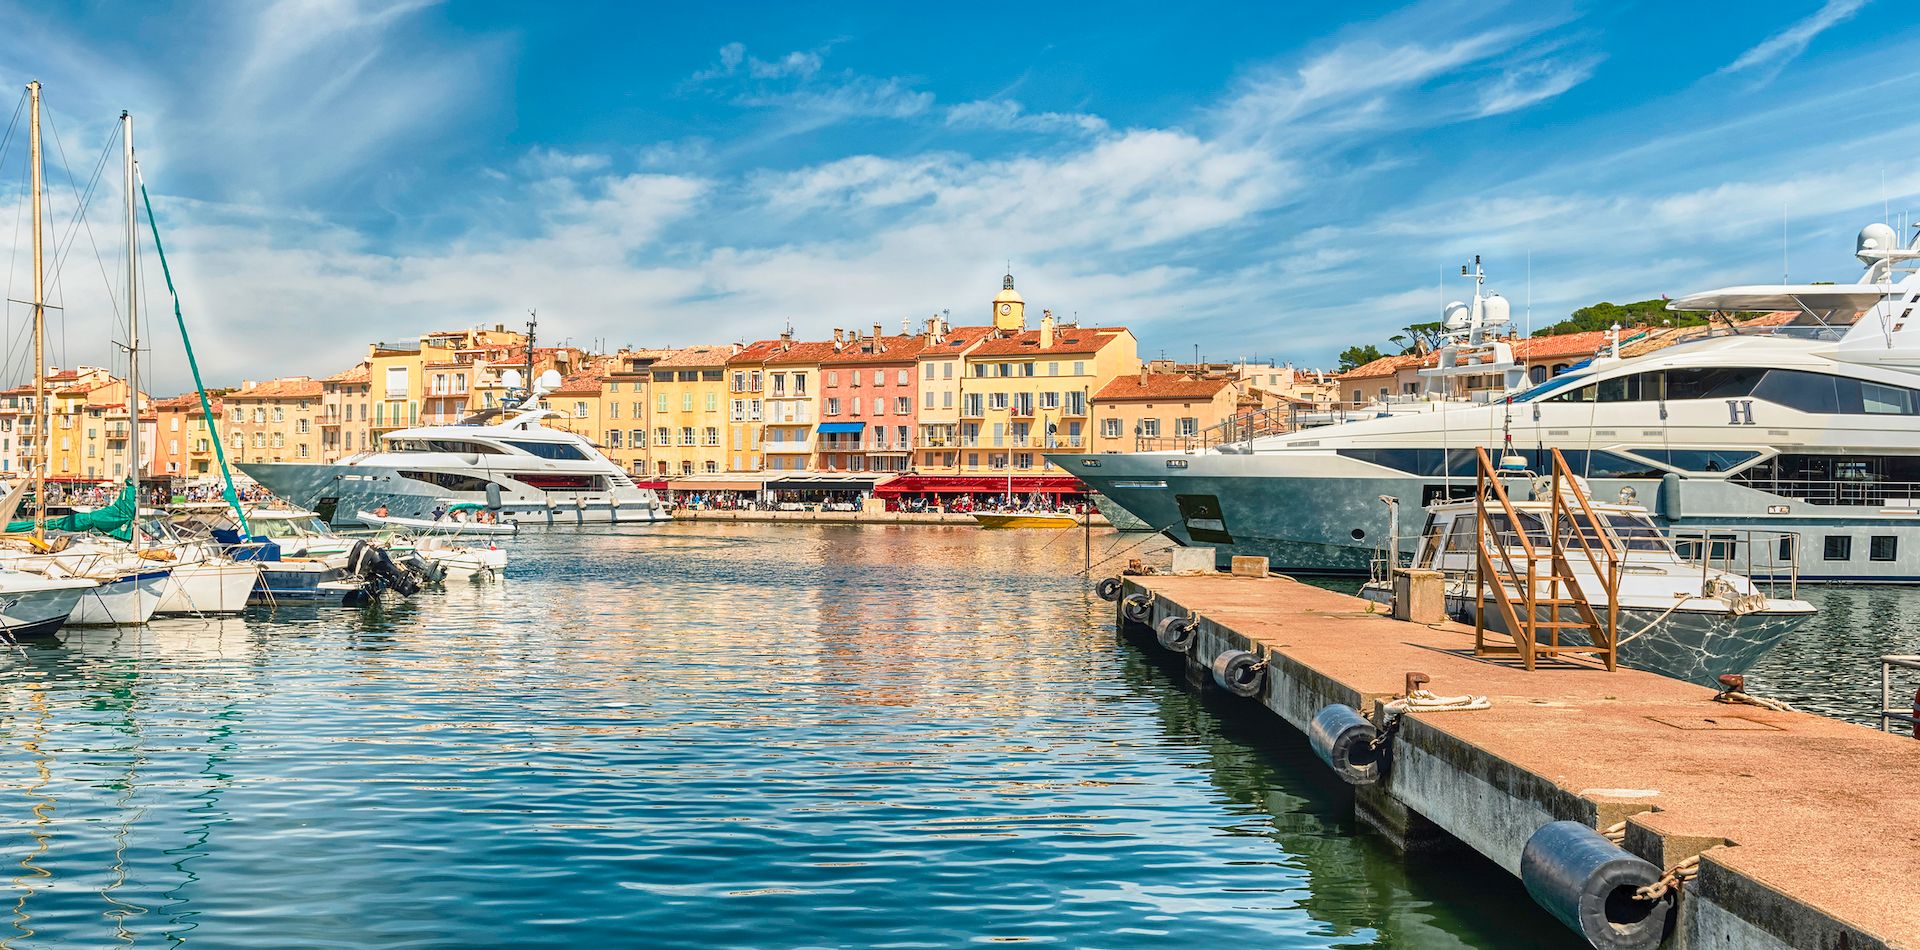 A Guide to the Luxury Shops in St Tropez